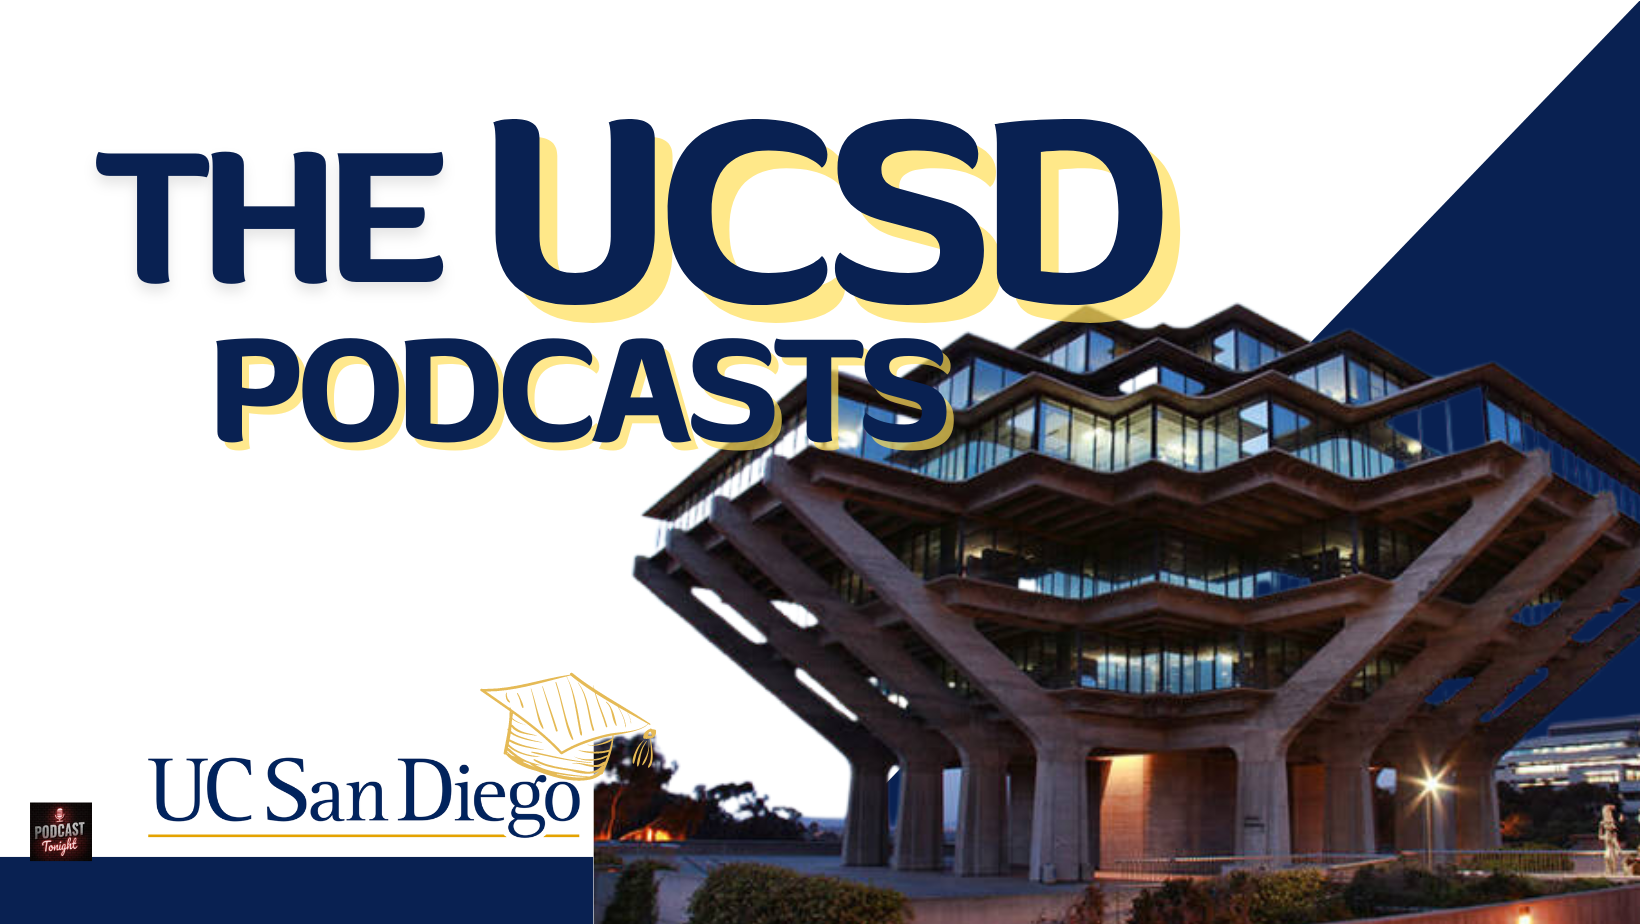 UCSD podcasts featured image